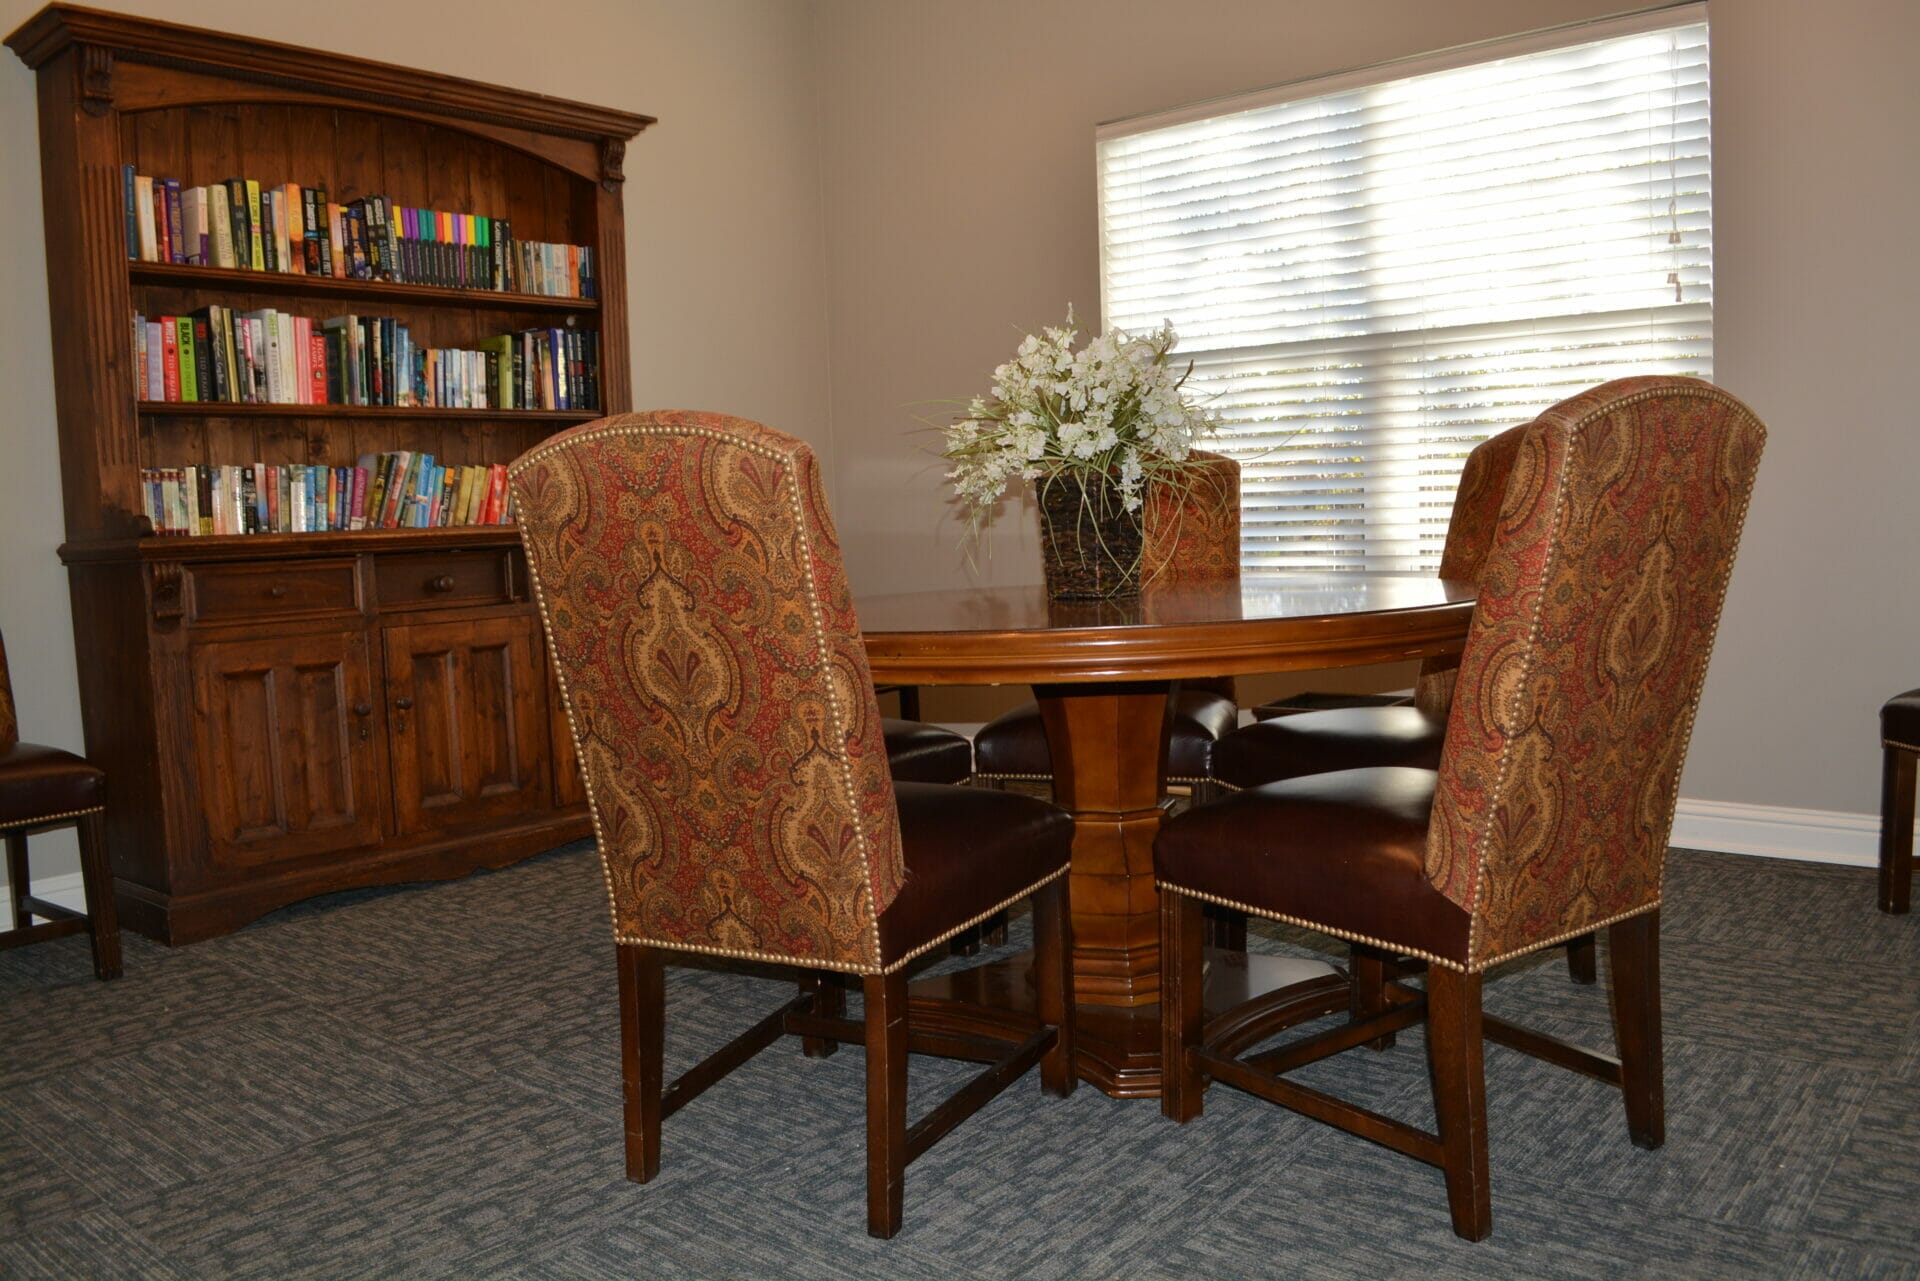 <span  class="uc_style_uc_tiles_grid_image_elementor_uc_items_attribute_title" style="color:#000000;">Rosegate Assisted Living apartment library with table and chairs</span>